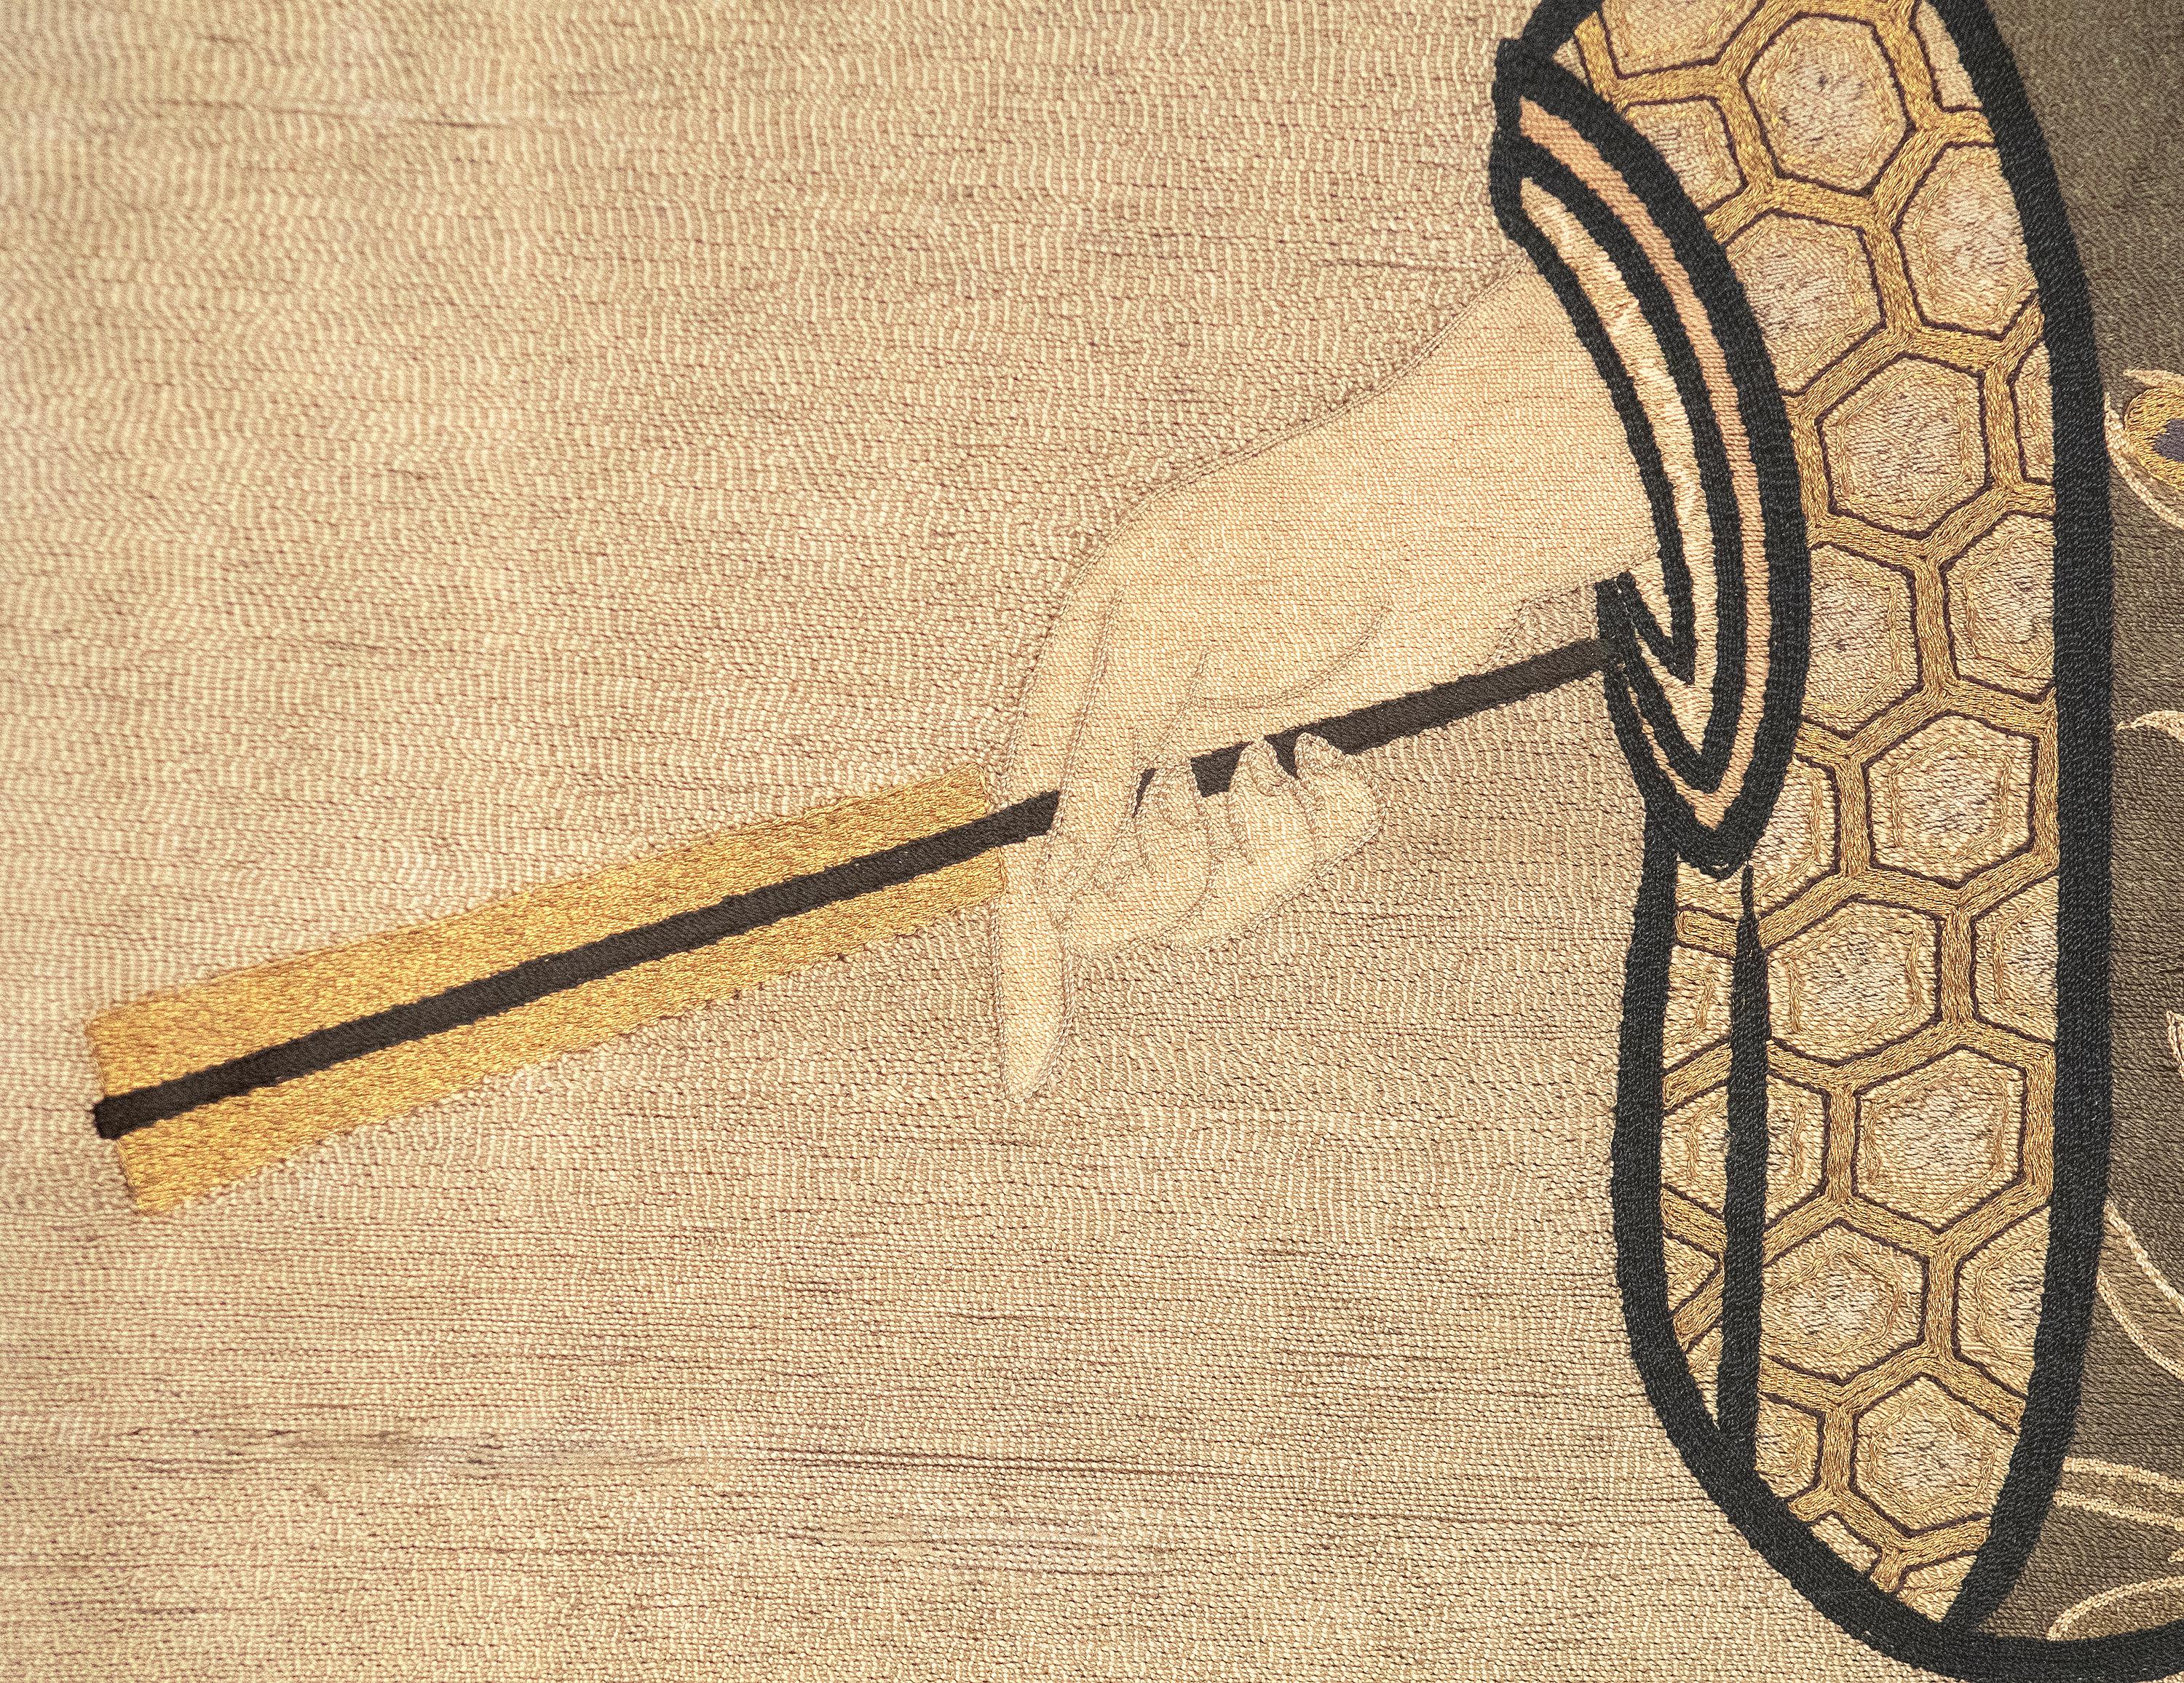 A Japanese embroidery from the Edo Period. “Figure of a Beauty” is a portrait embroidery, silk and gold thread in golds and grays.
Provenance:
Private Collection, California